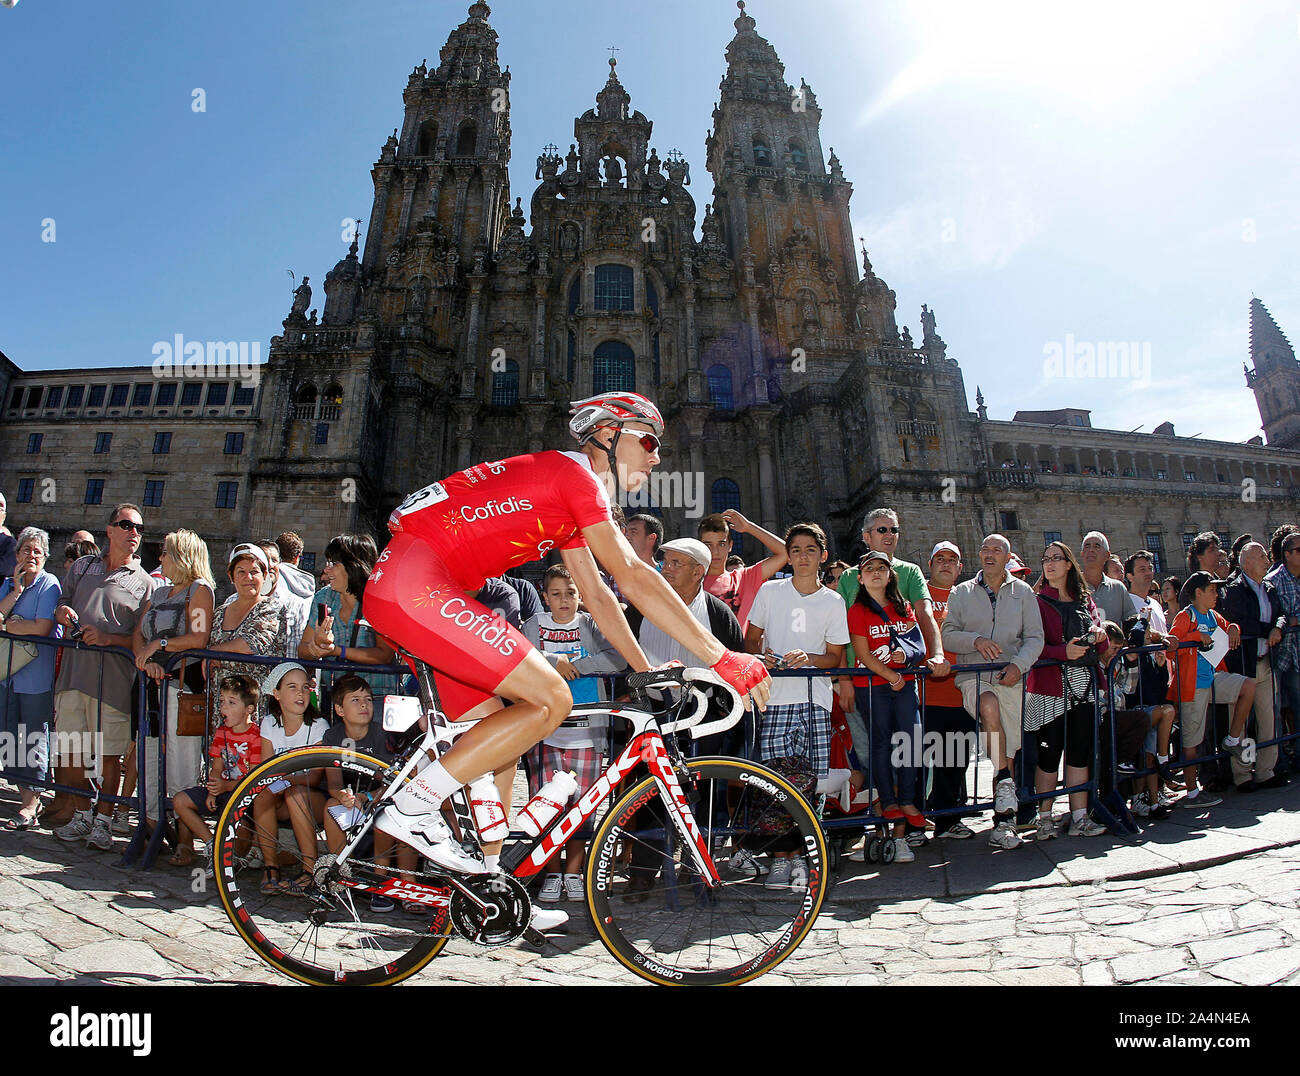 Florent Barle passes by the front of the Obradoiro of the Cathedral of Santiago de Compostela before the stage of La Vuelta 2012 between Santiago de C Stock Photo